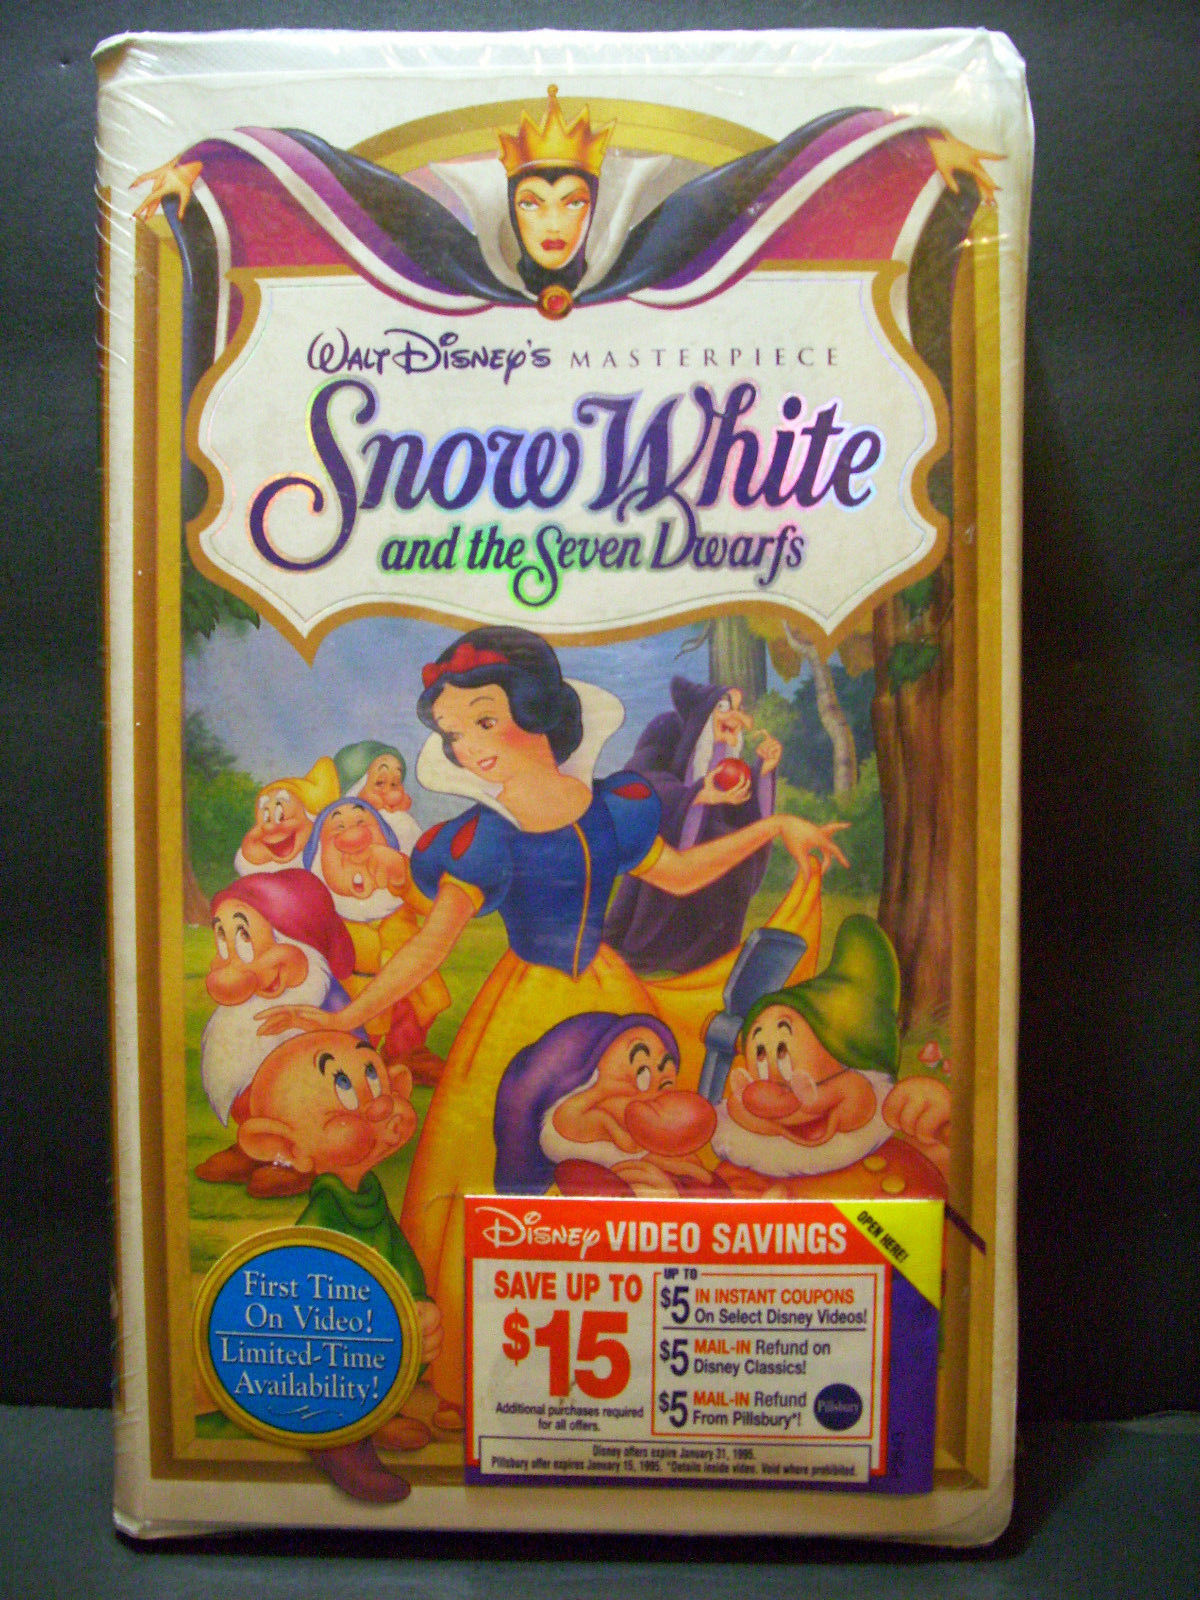 Sealed Snow White And The Seven Dwarfs Vhs 1994 Walt Disney Masterpiece Collection Vhs Tapes 